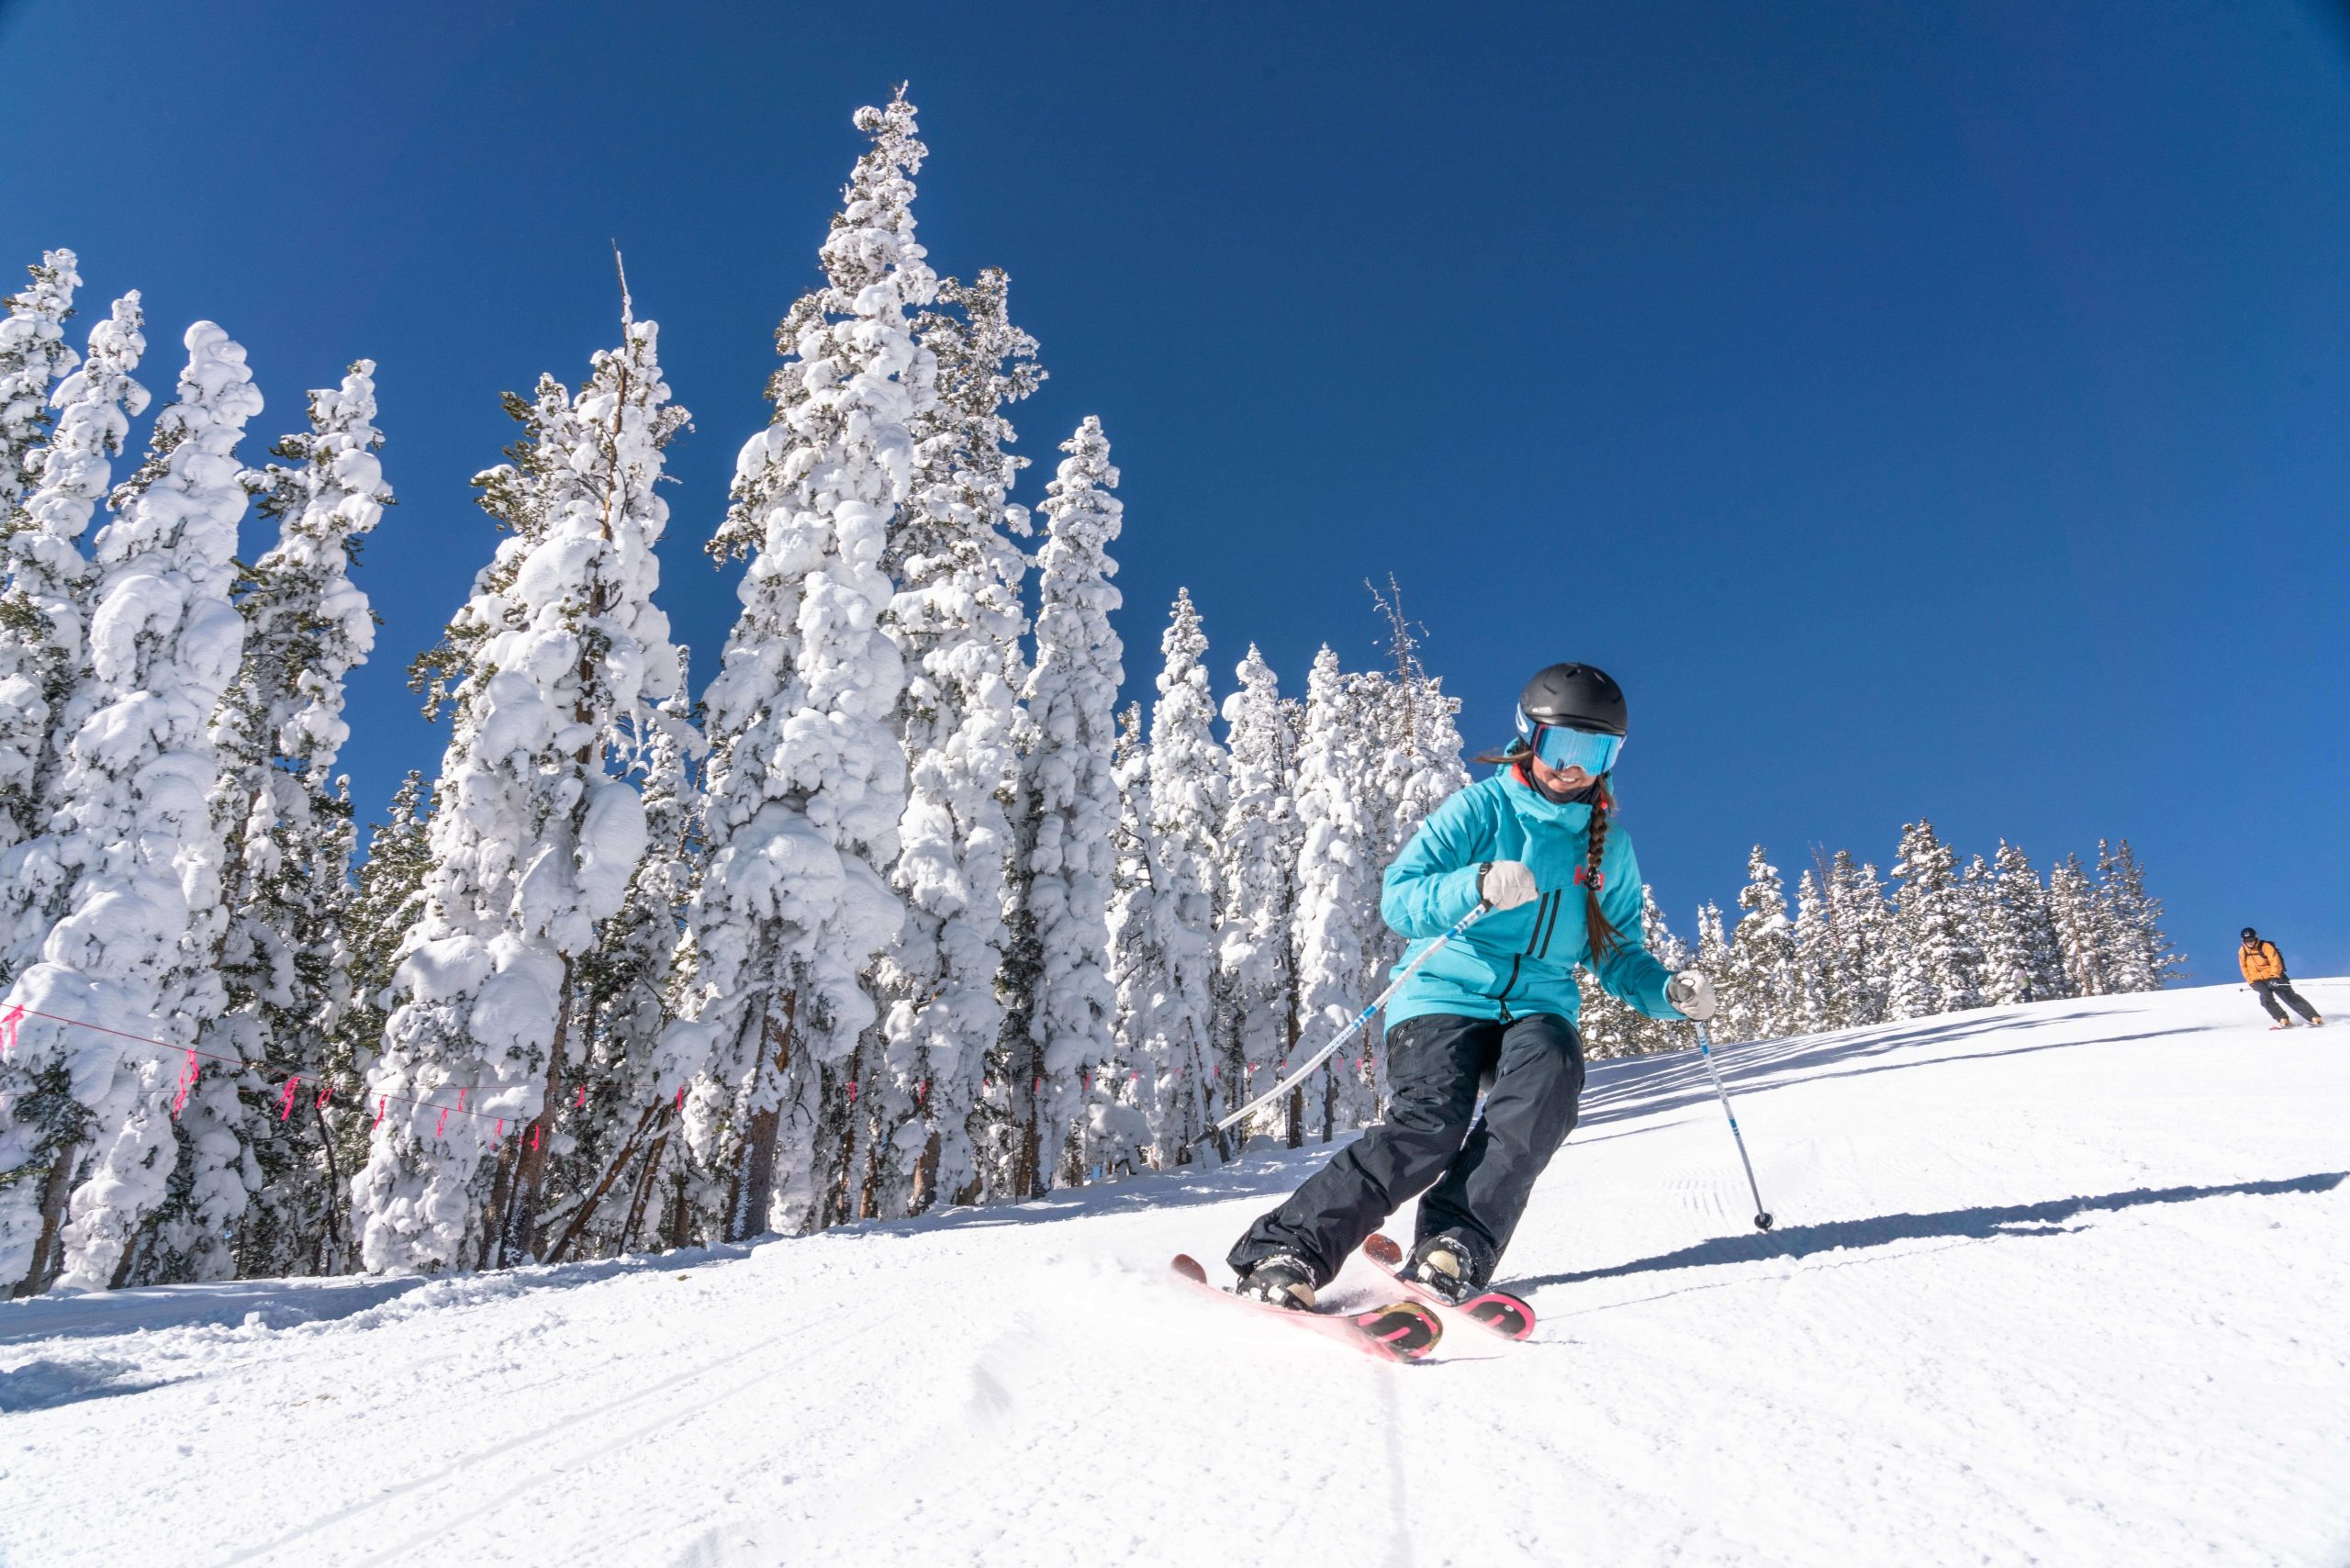 the best price on ski and snowboard rentals in snowmass